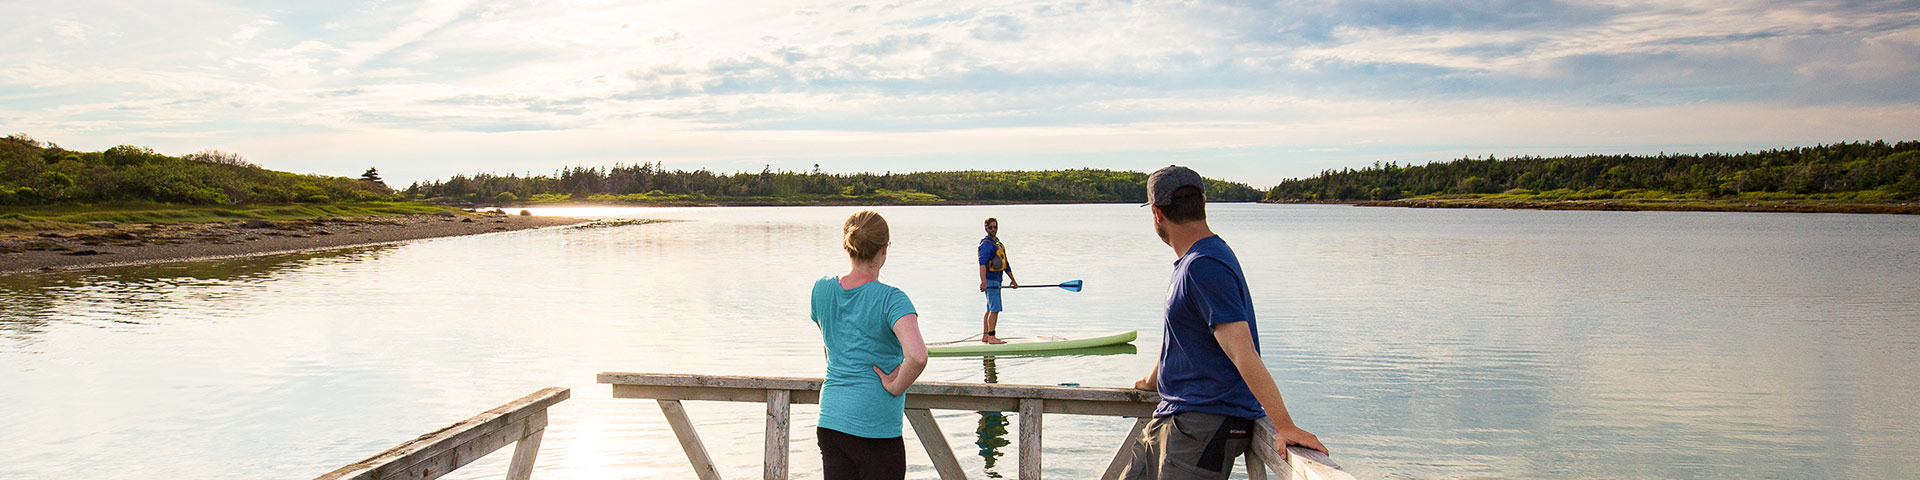  Two people stand on a dock watching someone paddle board while the sunsets